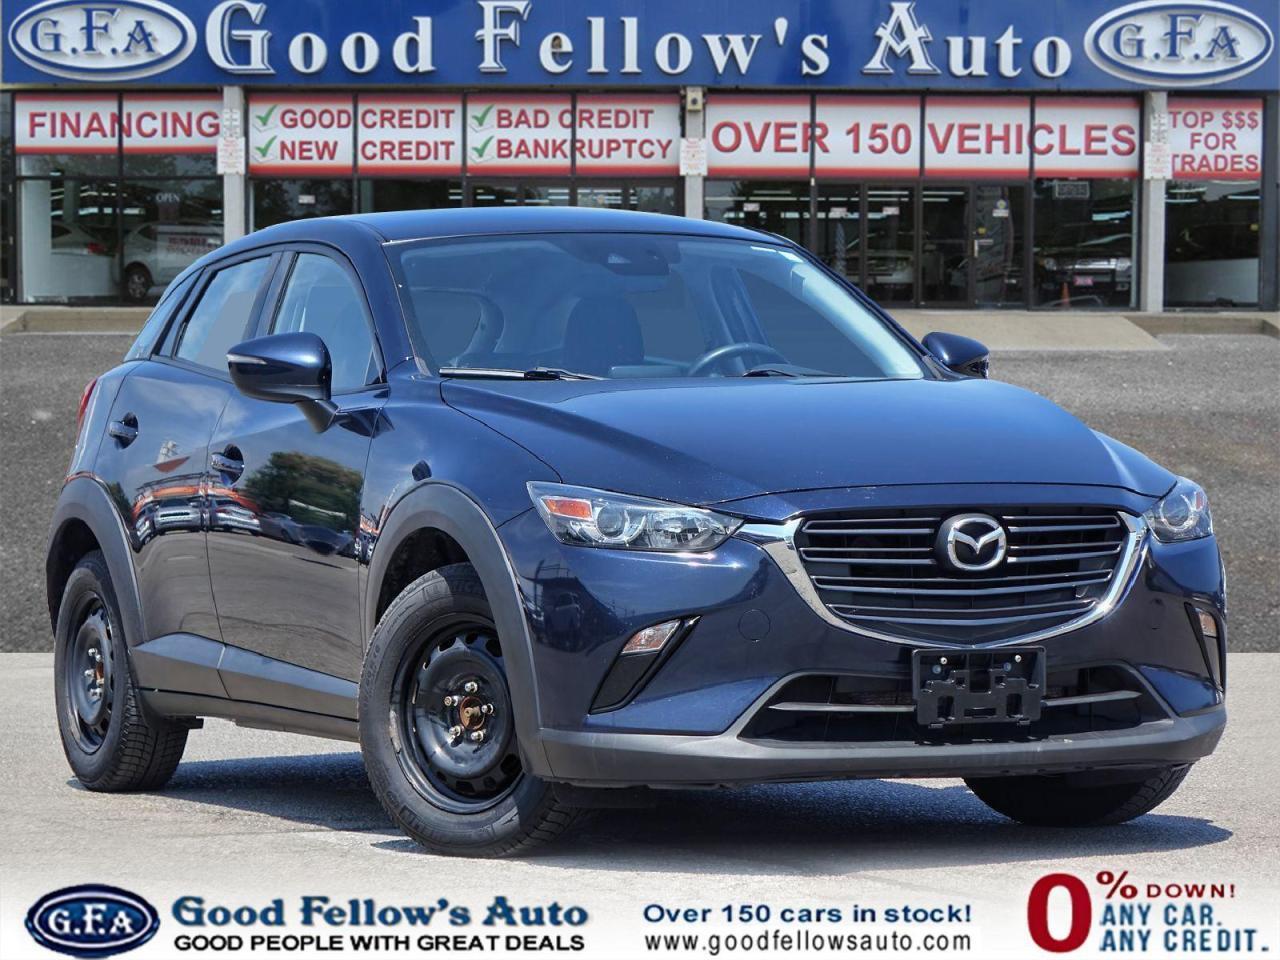 2019 Mazda CX-3 GS MODEL, FWD, REARVIEW CAMERA, HEATED SEATS, BLIN